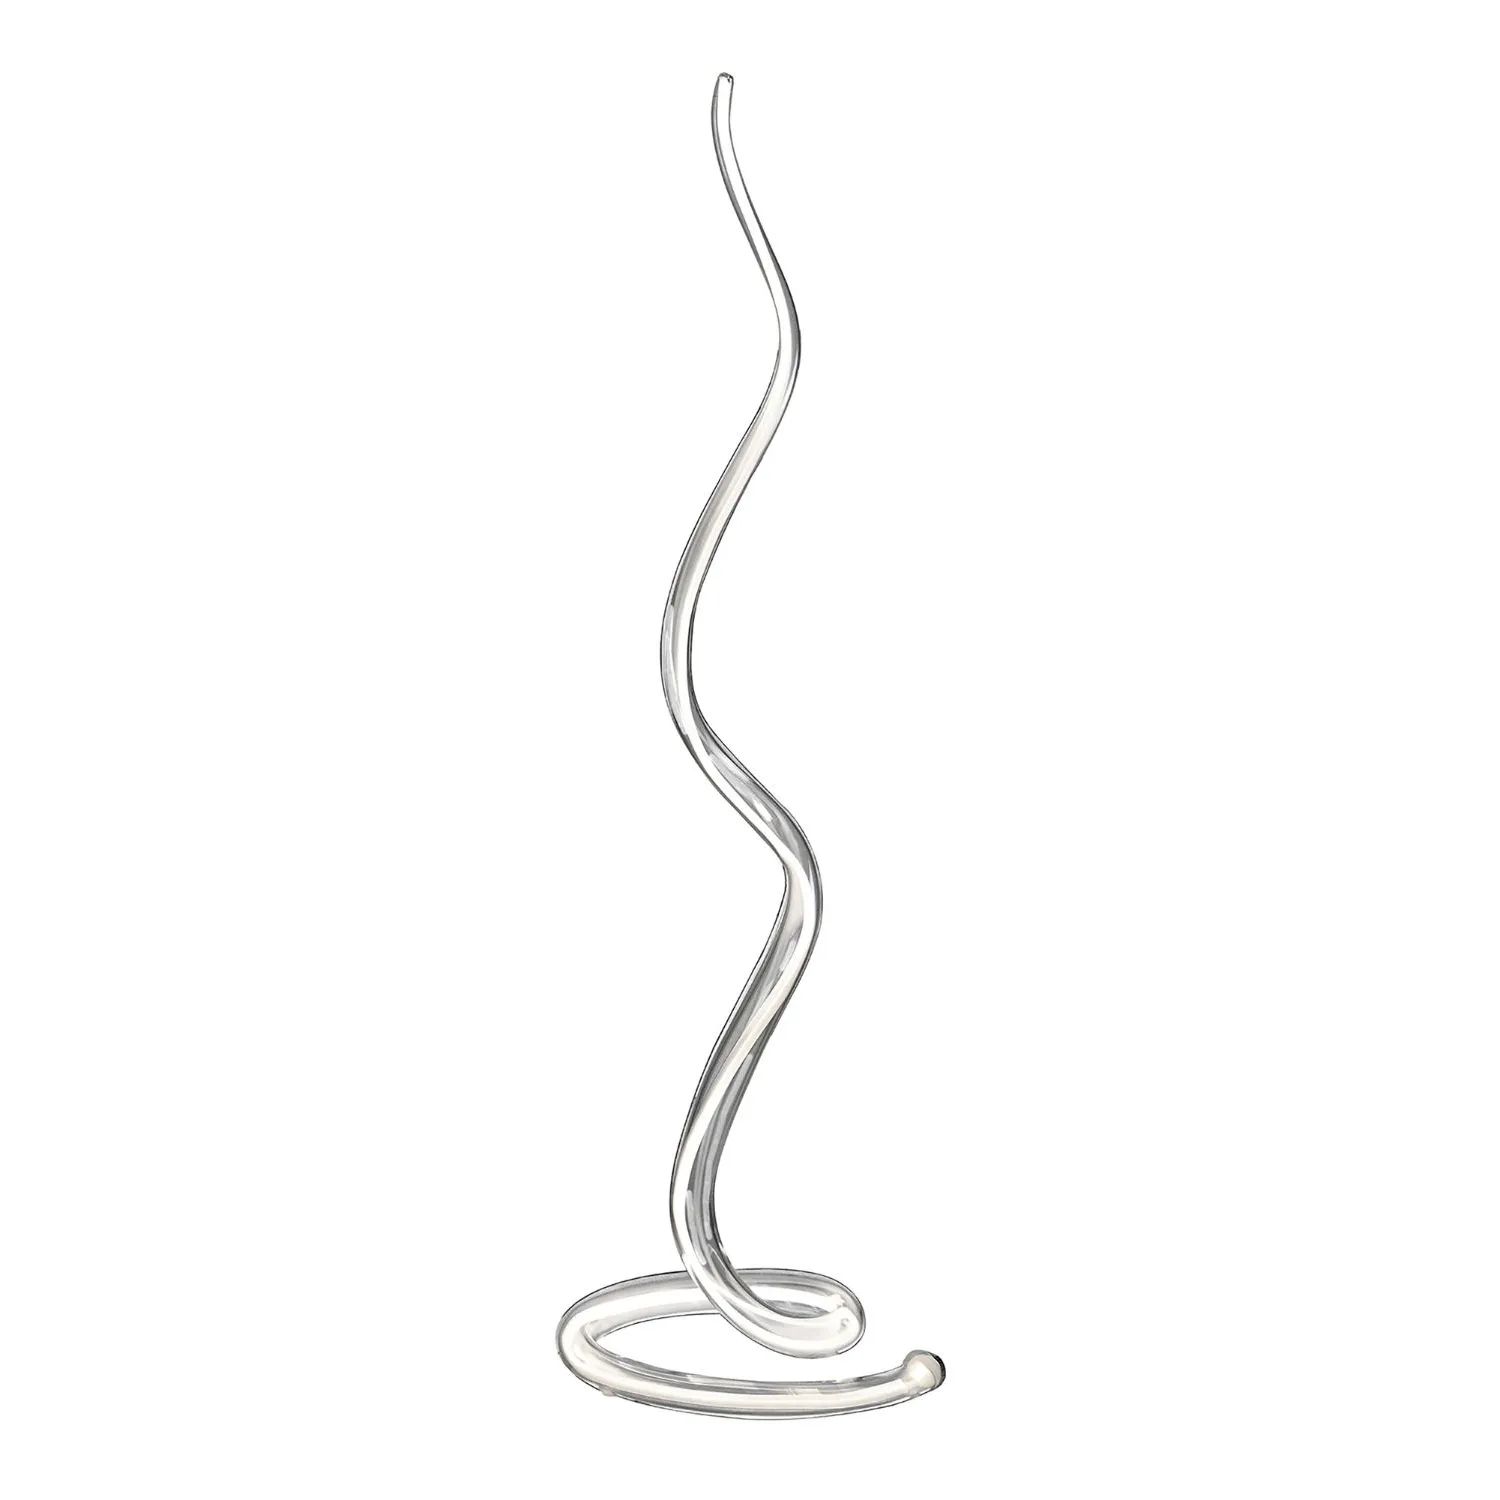 Adaggio Iris Crystal Floor Lamp, 25W LED, 3000K, 2000lm, Polished Chrome Clear, COLLECTION ONLY, Made In Spain, 3yrs Warranty